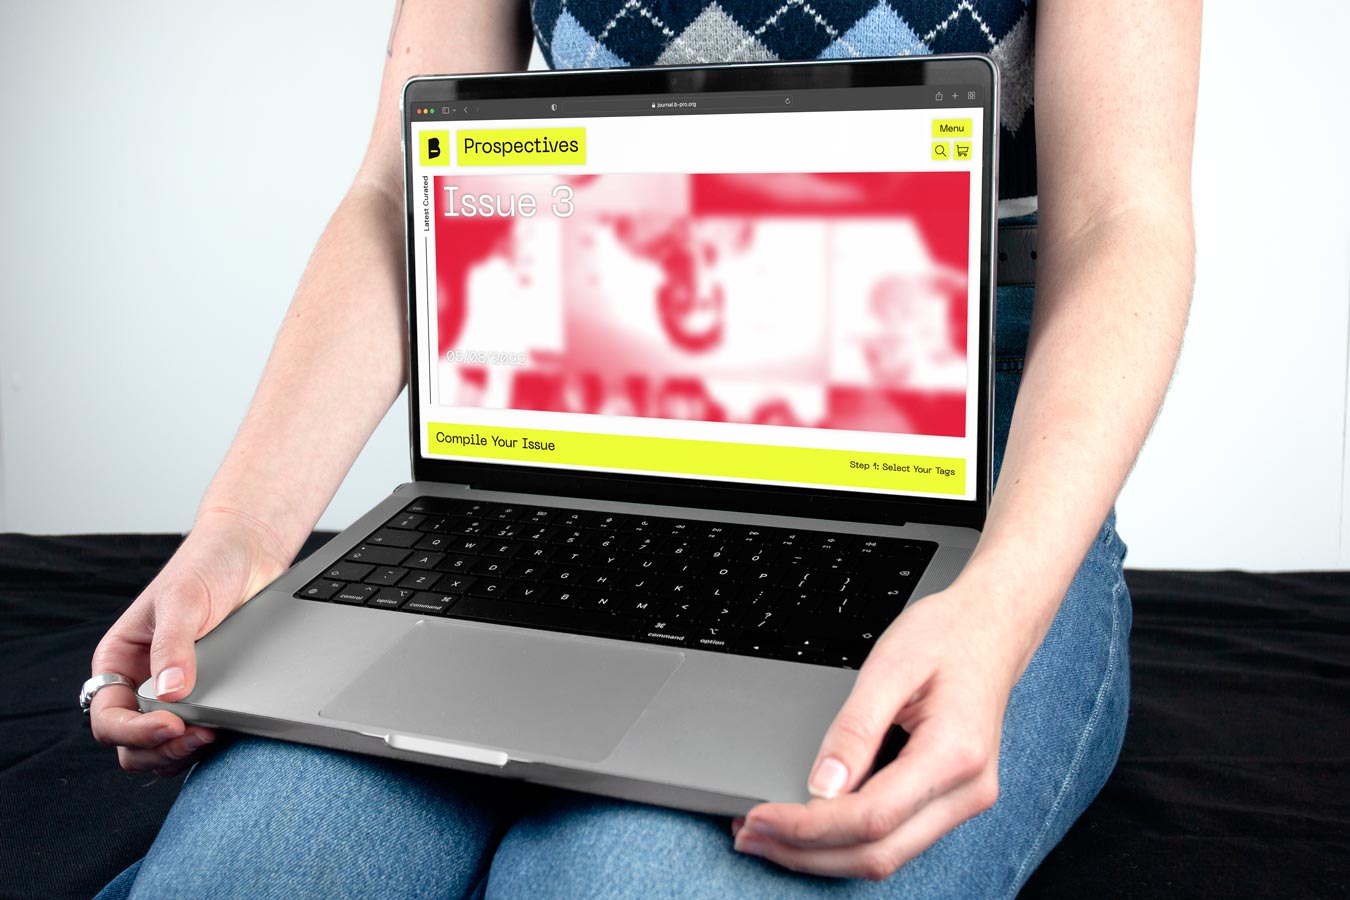 A laptop resting on a persons lap, showing the Prospectives website on the laptop screen